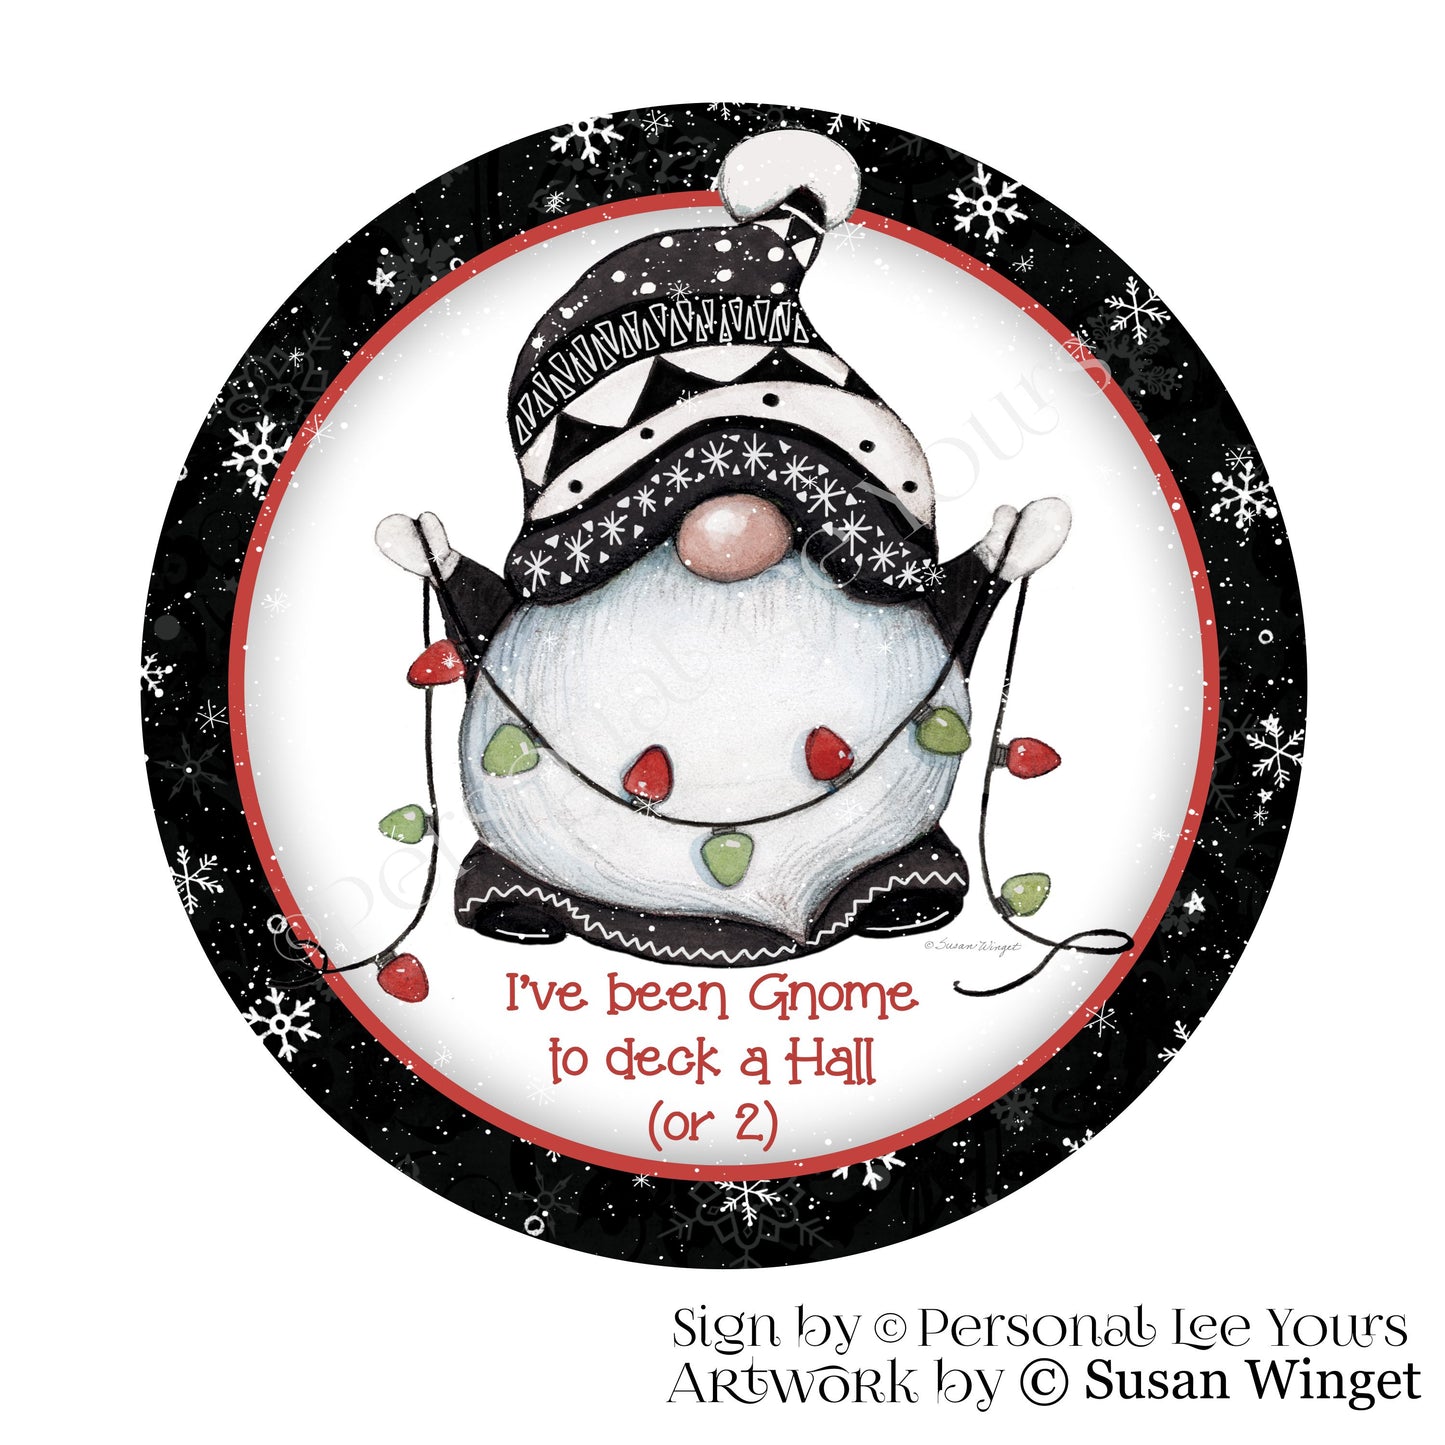 Susan Winget Exclusive Sign * I've Been Gnome To Deck A Hall Or 2 * Round * Lightweight Metal